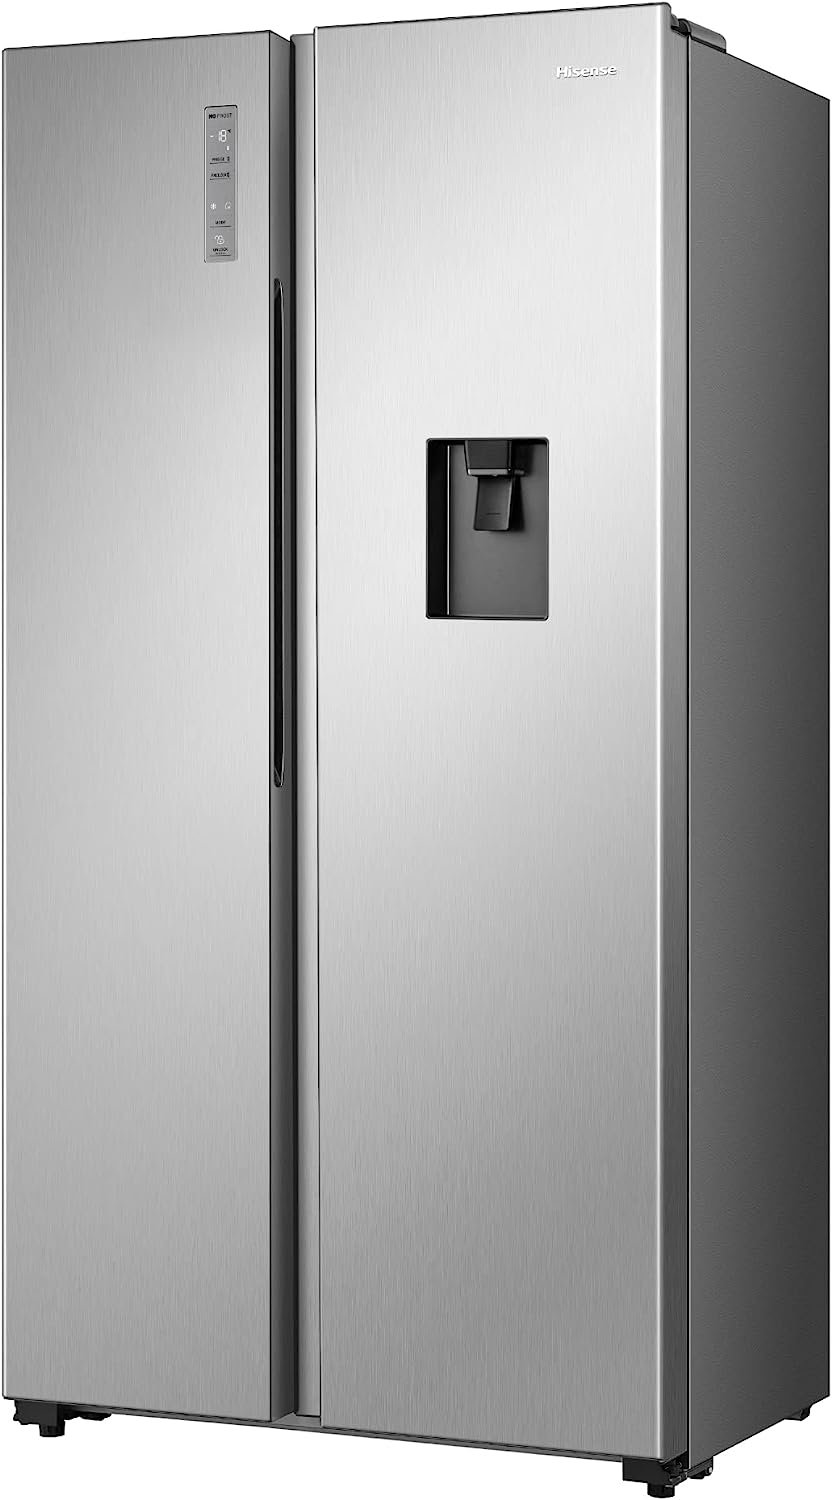 Hisense RS670N4WSU1 Side by Side Refrigerator with Water Dispenser ...